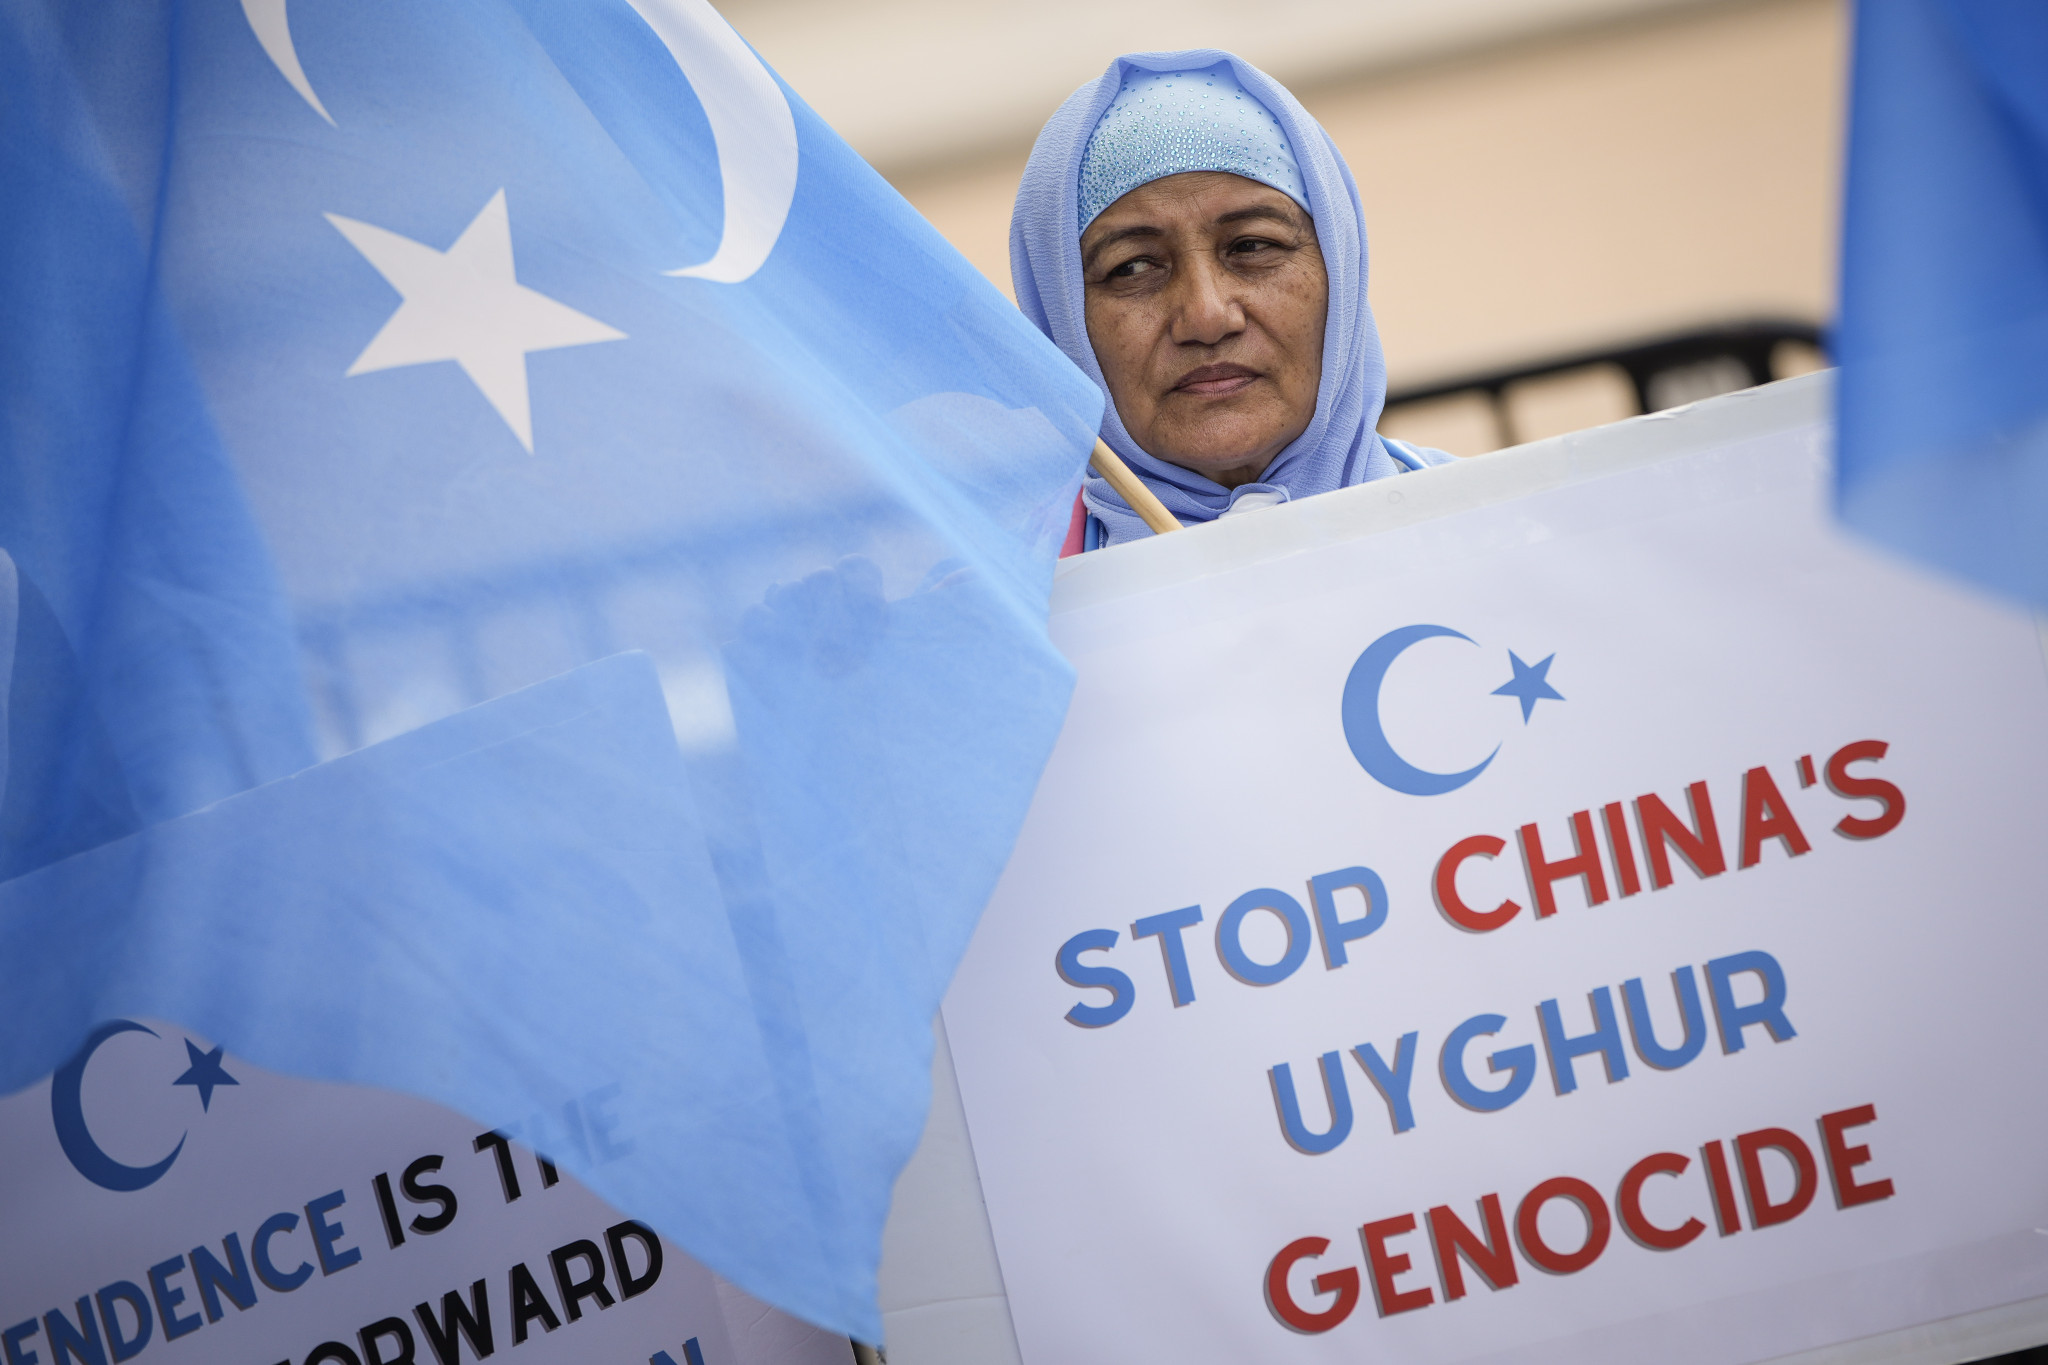 China's treatment of Uyghurs was a recurring talking point in the lead-up to Beijing 2022 ©Getty Images